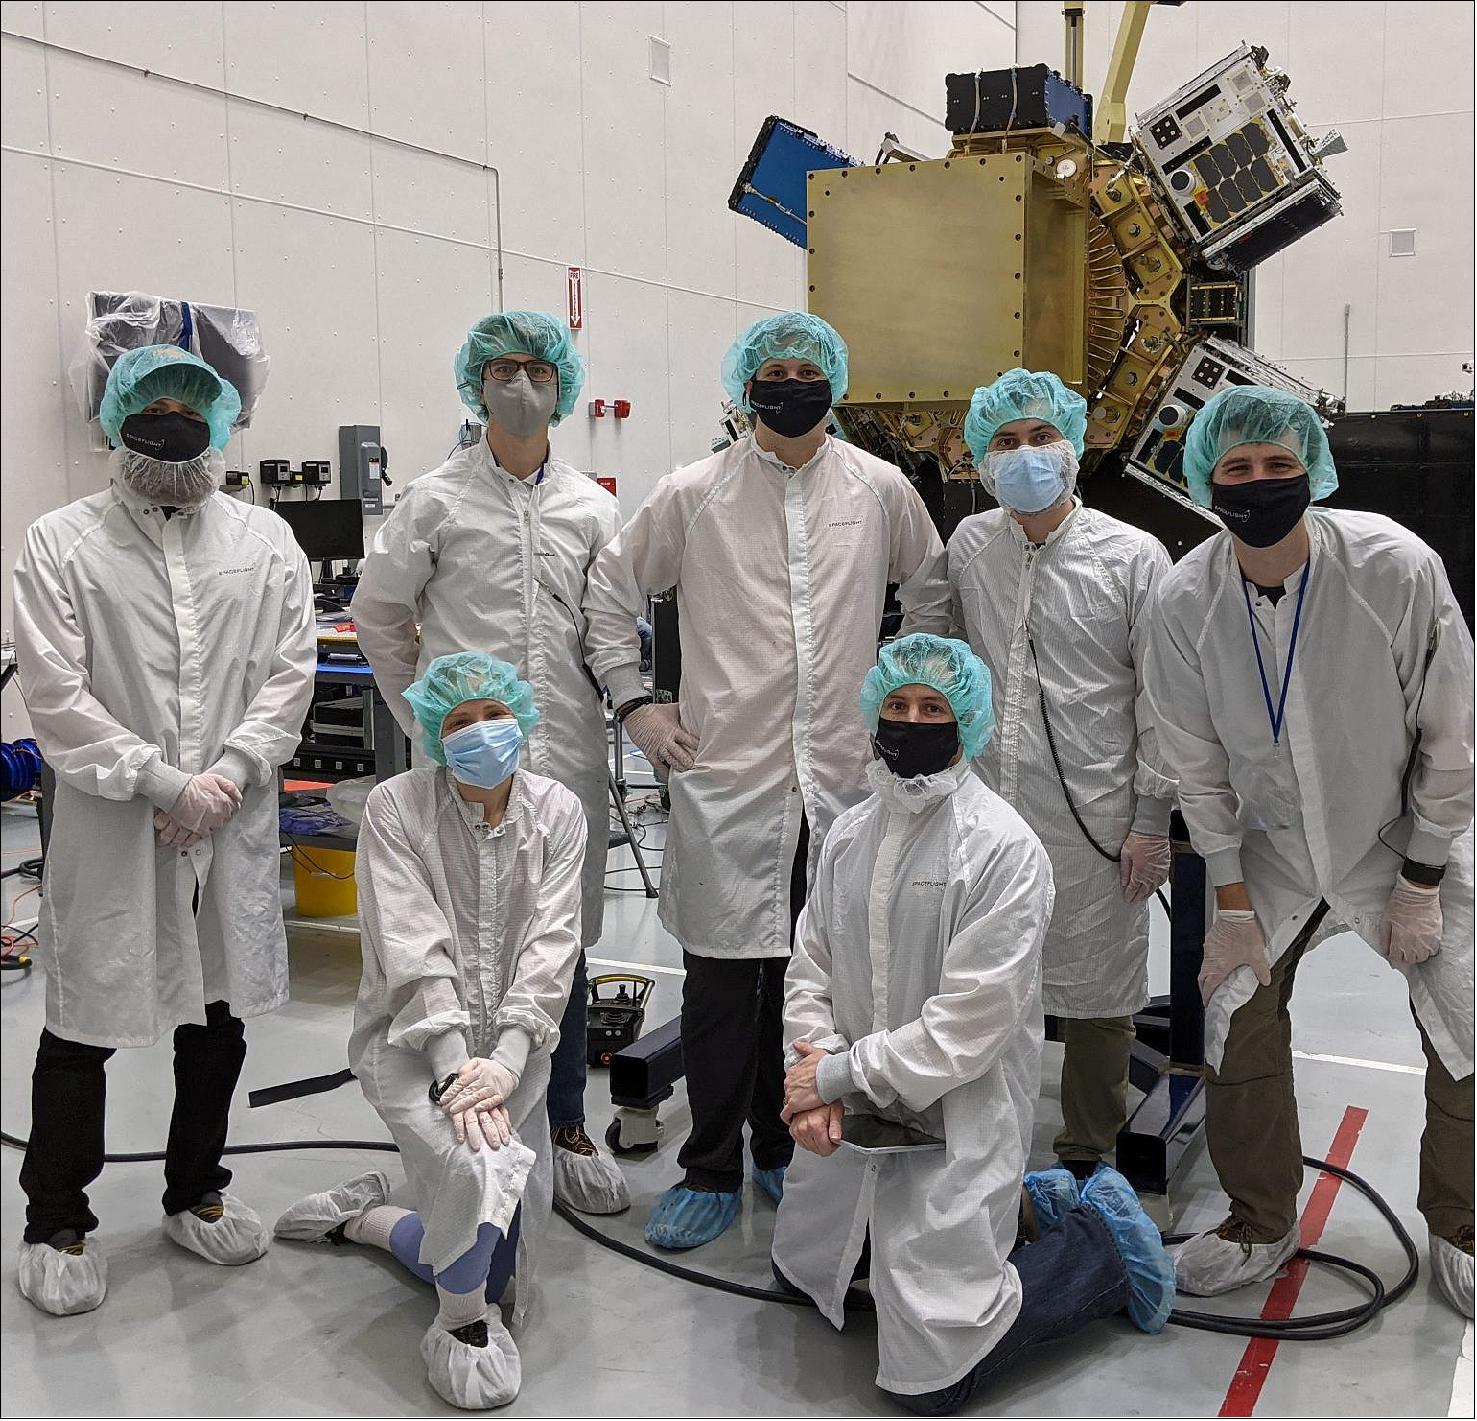 Figure 8: Spaceflight Inc. integration team (with the Sherpa-FX OTV in the background) at the SpaceX Payload Processing Facility at Cape Canaveral Space Force Station. Back row: M. Coletti, A. Lewandowski, J. Larkin, M. Foster, M. Boysen Front row: A. Taylor, R. Olcott (image credit: Spaceflight)